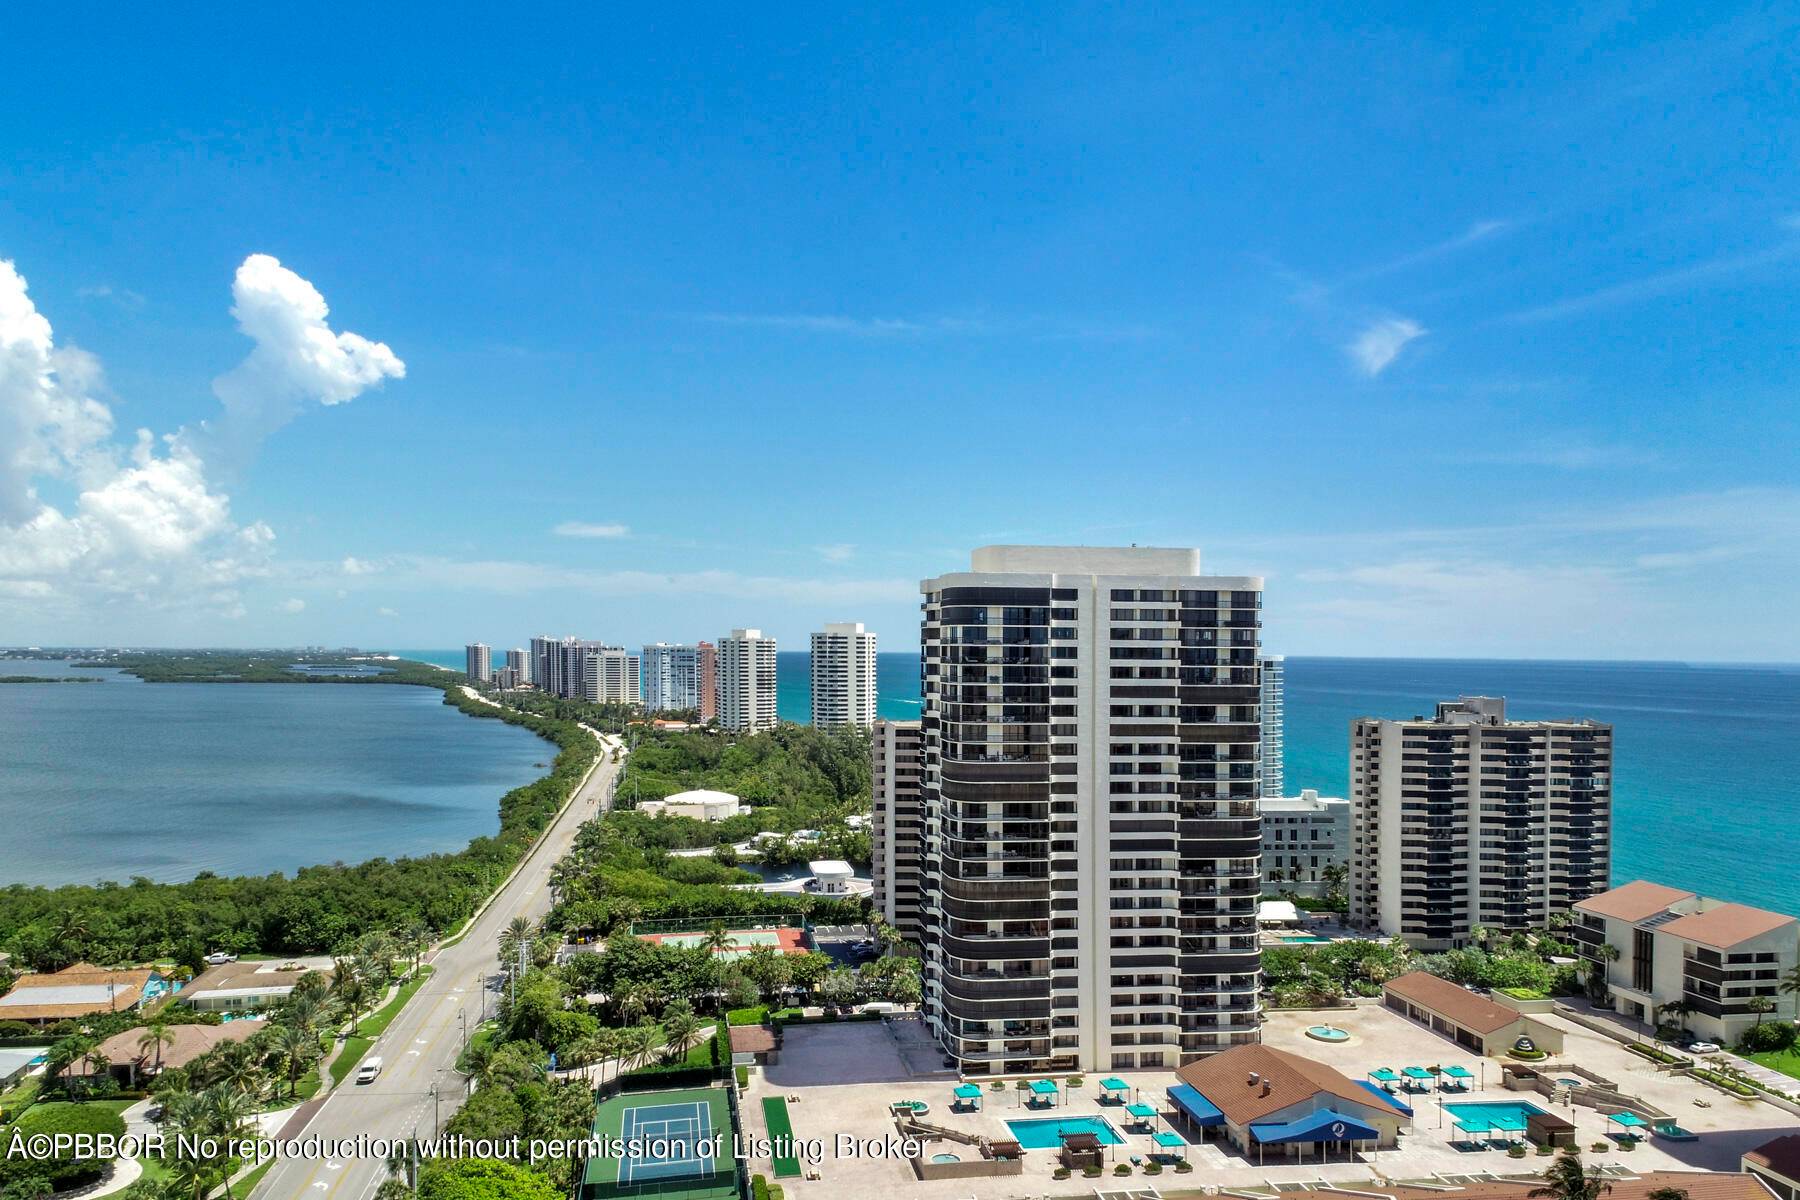 Experience waterfront luxury in this 3 bedroom condo with Intracoastal views, updated appliances, brand new HVAC and open layout maximize comfort.